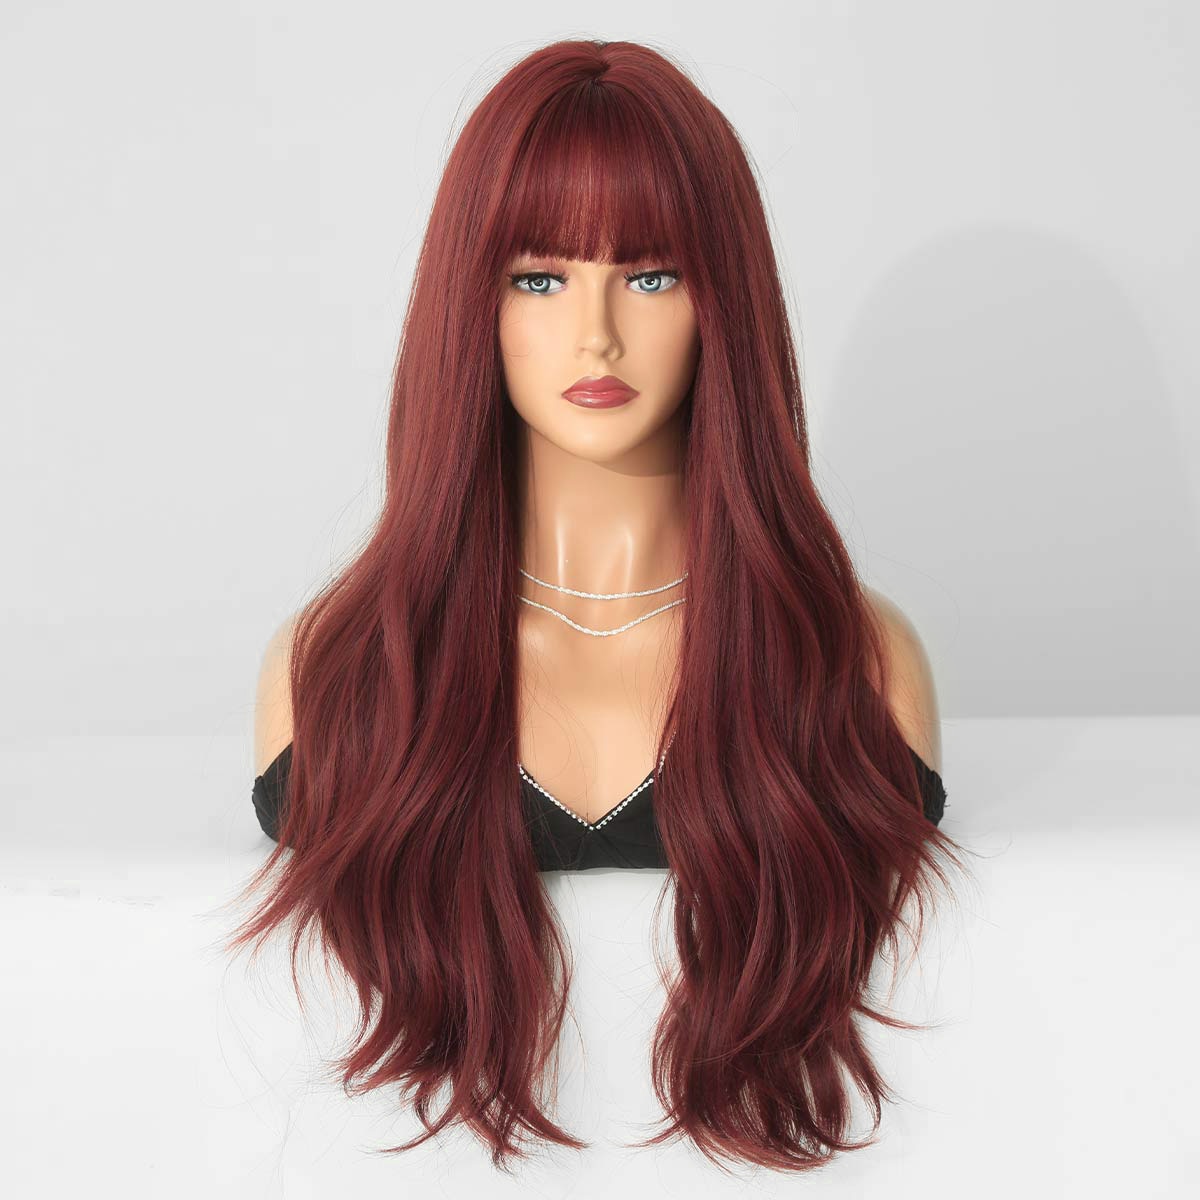 Christmas gifts Synthetic Wigs For Women Long Wavy Ombre Red Wig Heat Resistant Natural Cosplay Party Wigs Cosplay Party Lolita Wigs Wavy